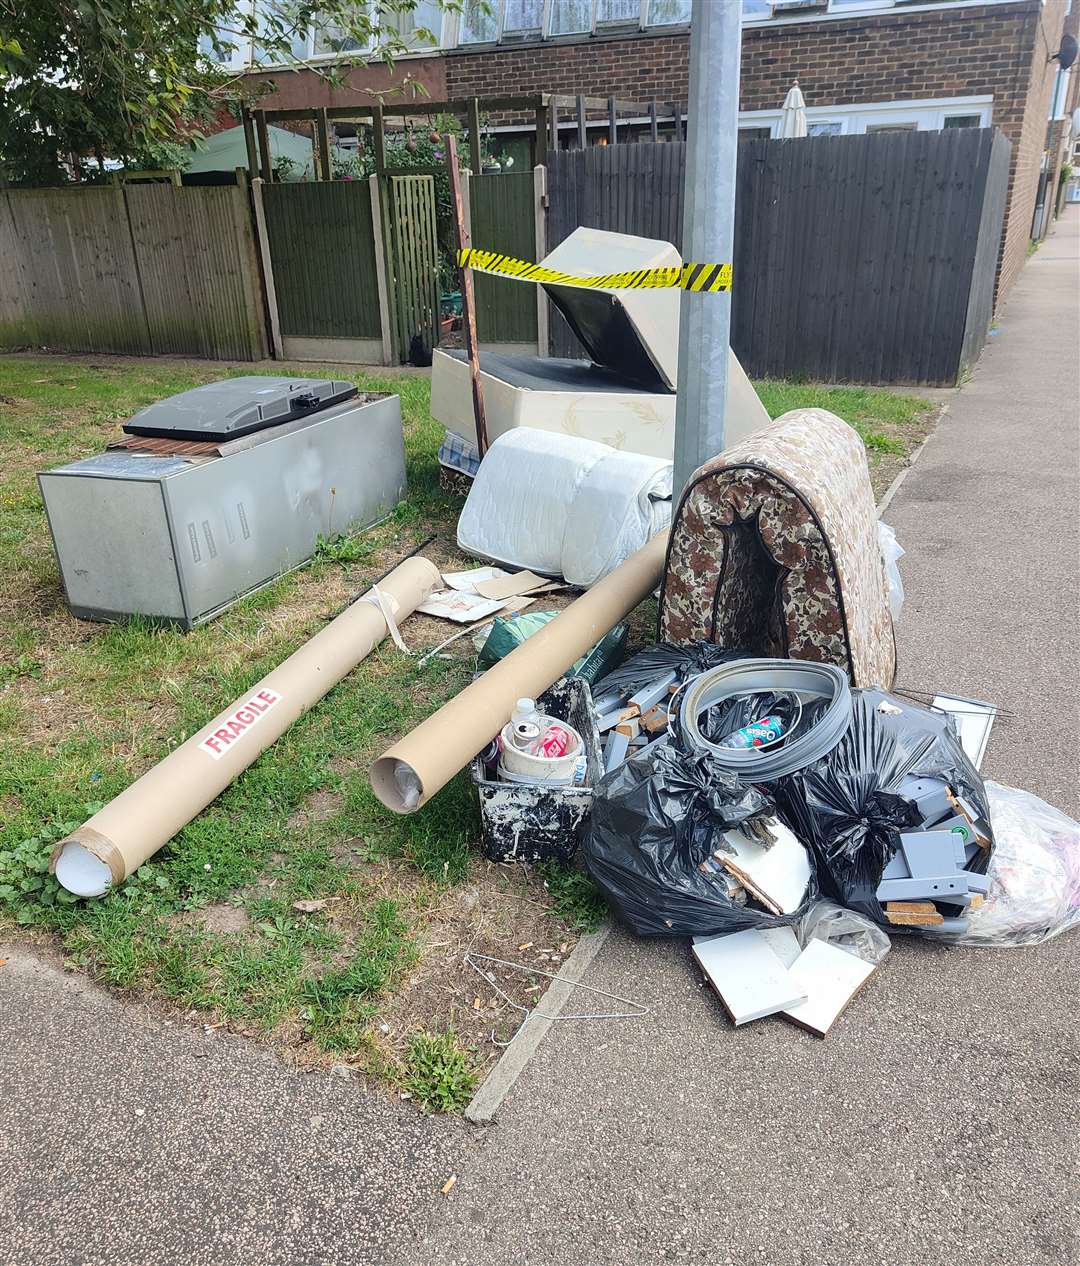 Mattresses, sacks of rubbish, fridges and cardboard have been there for 8 weeks according to Mrs Norris.